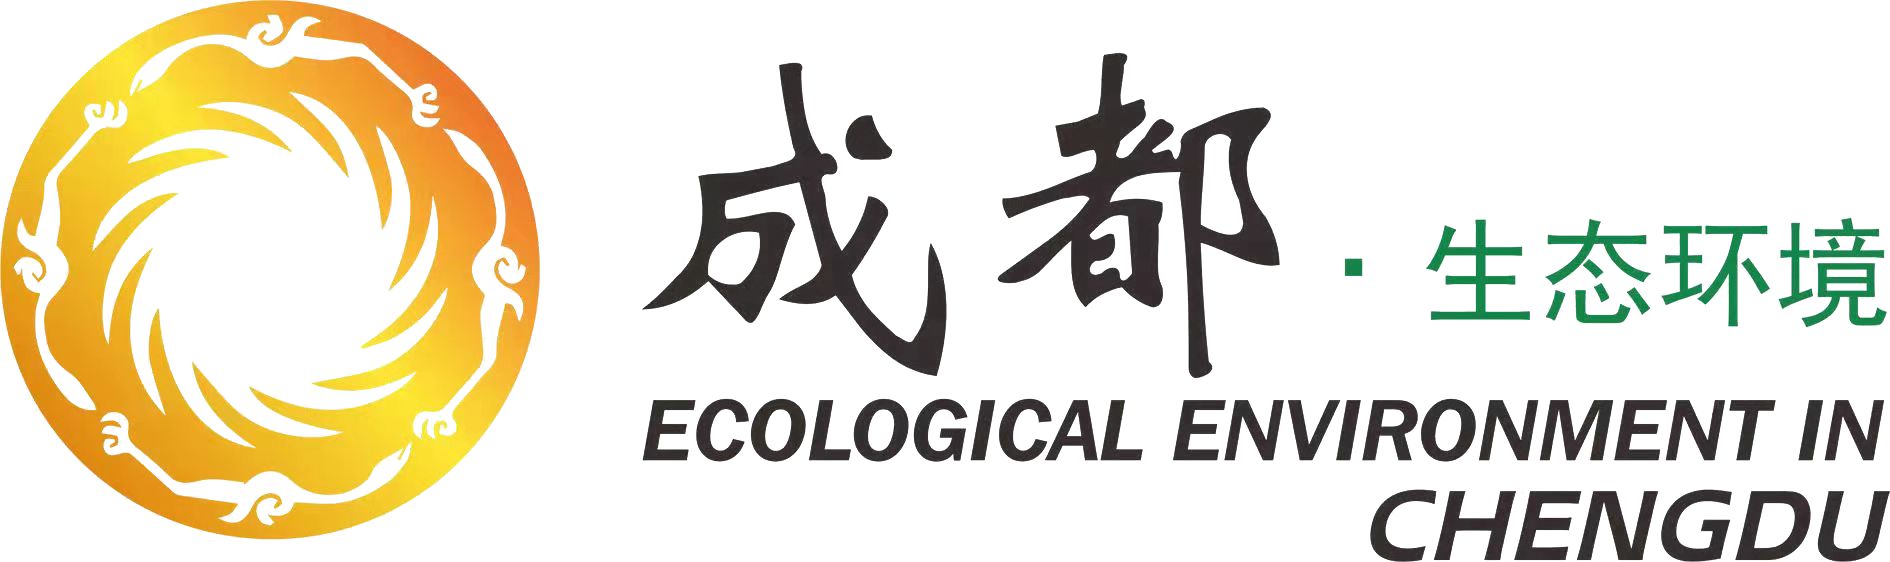 ECOLOGICAL ENVIRONMENT IN CHENGDU